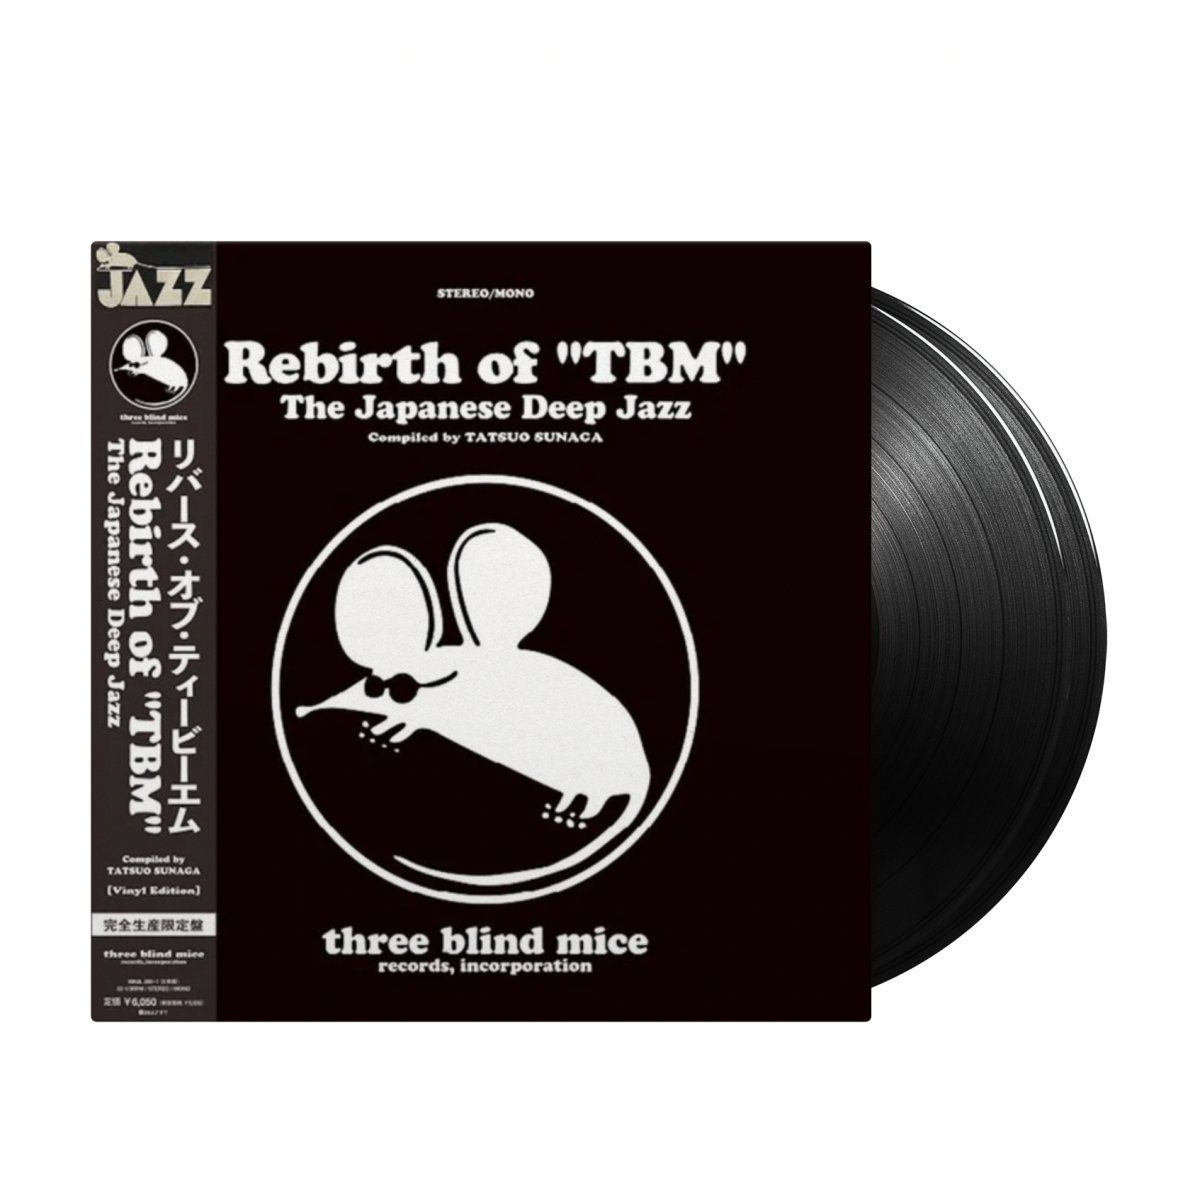 V/A - Rebirth of "TBM" The Japanese Deep Jazz Compiled by Tatsuo Sunaga - Inner Ocean Records